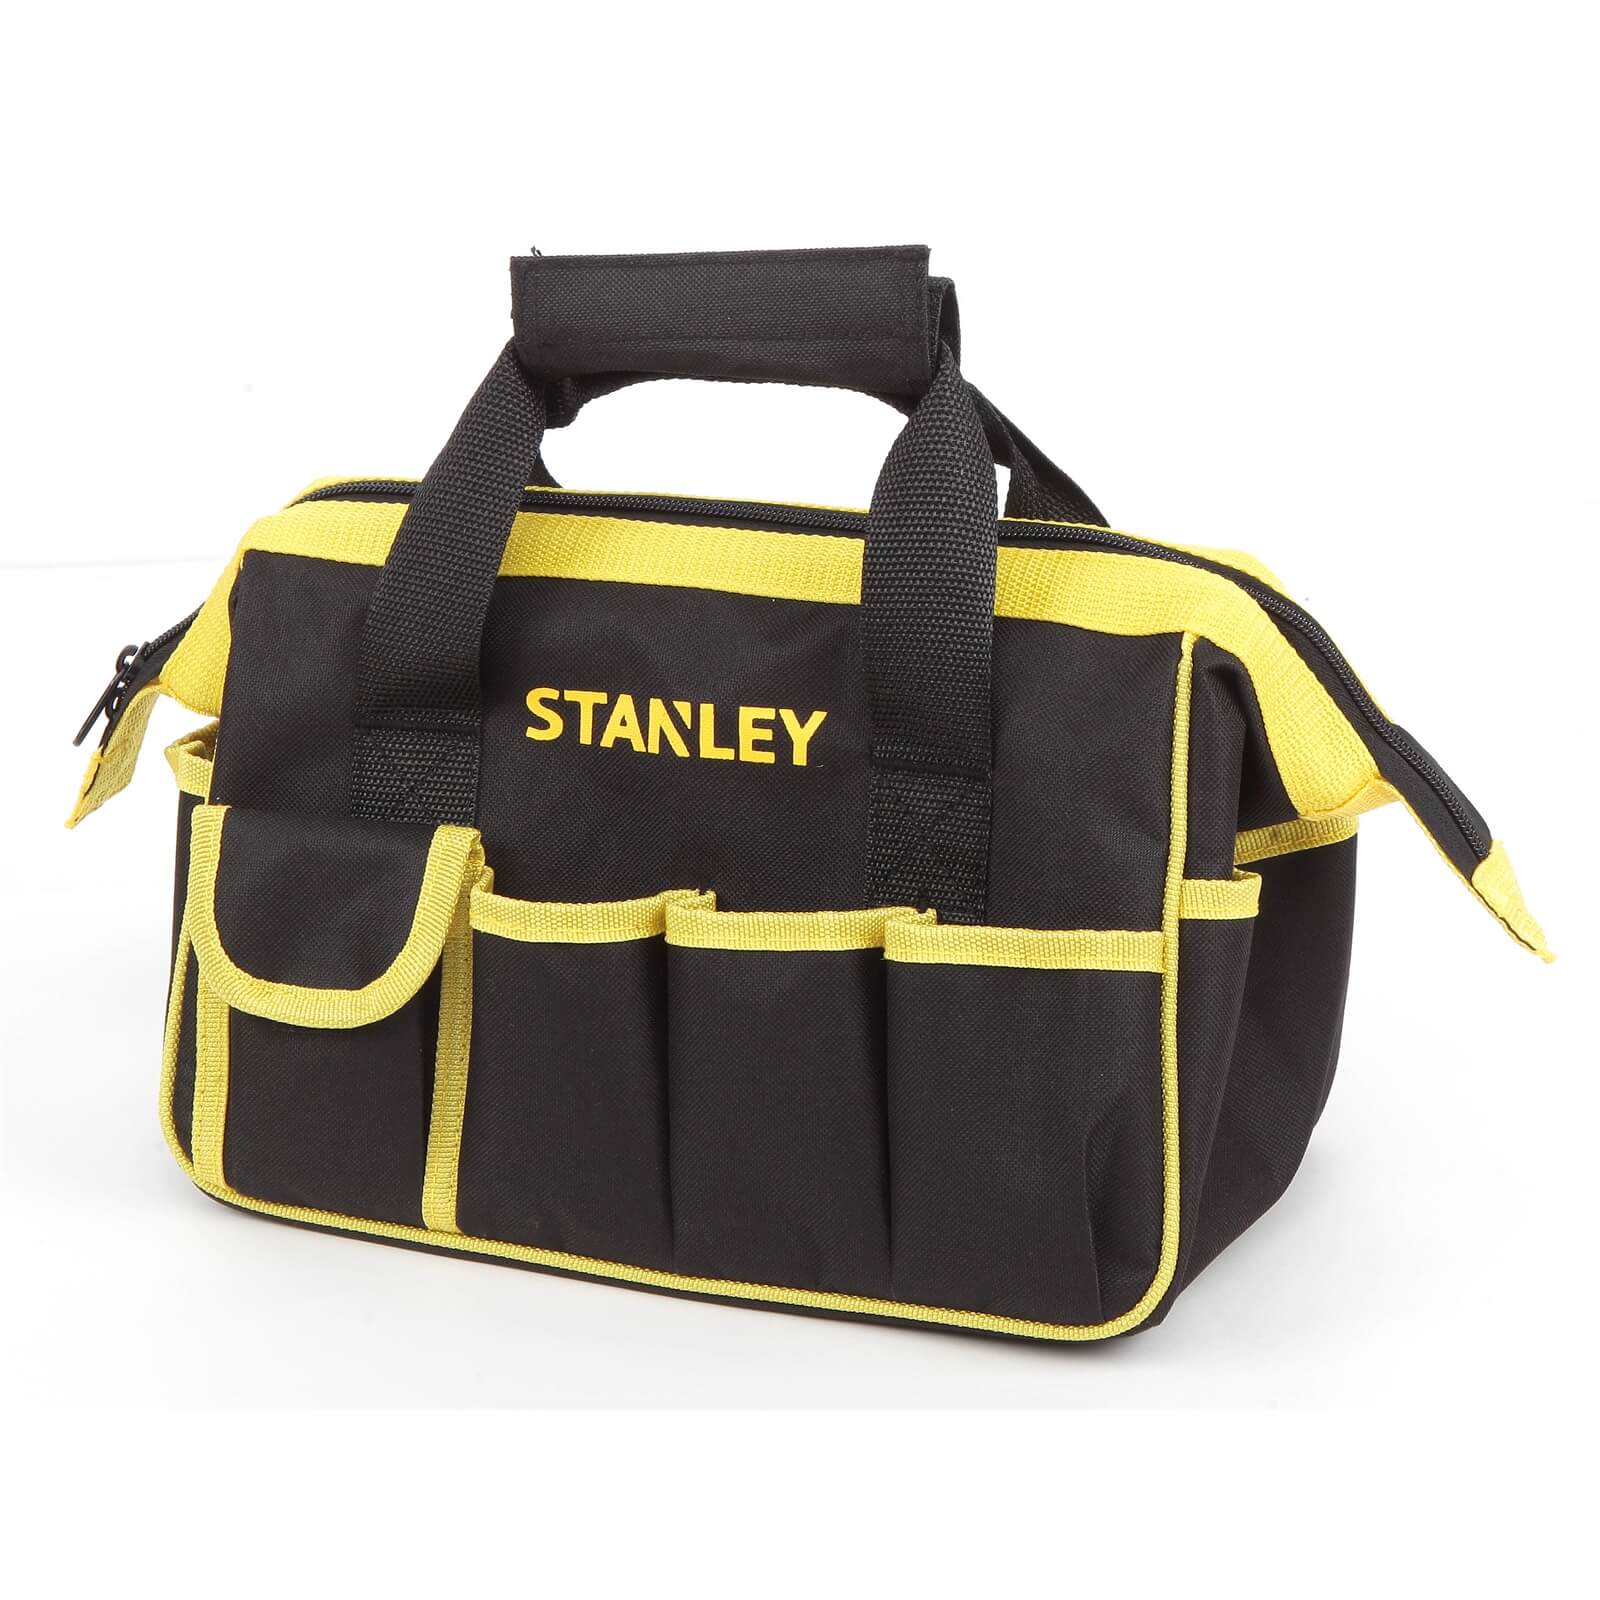 STANLEY STHT0-75947 131pc Home Tool Set